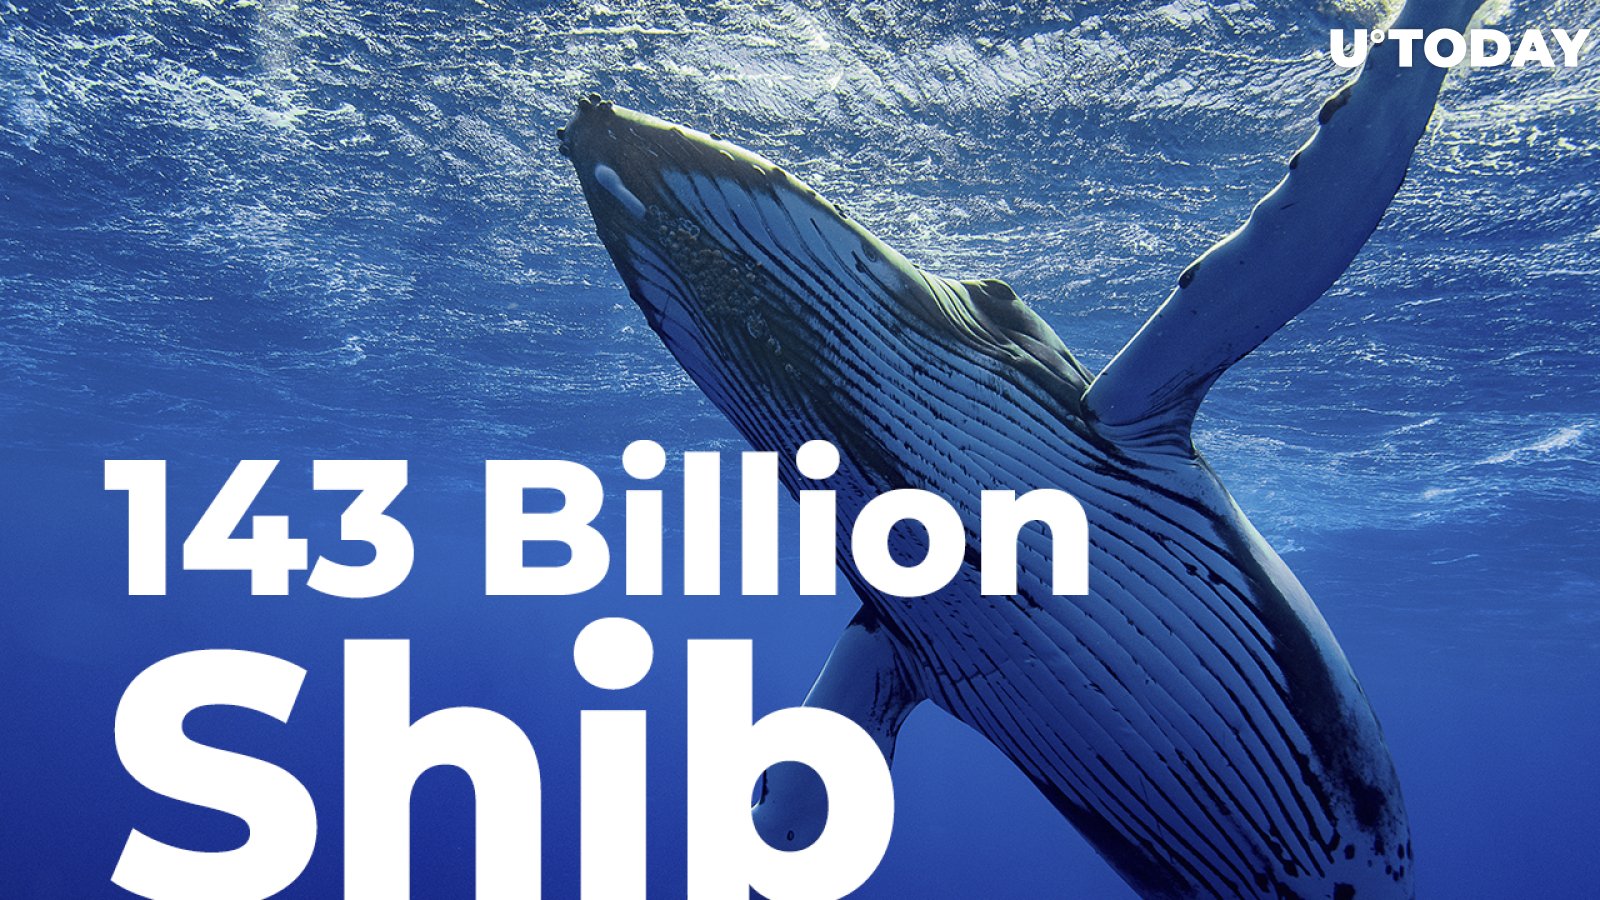 This Whale Buys 143 Billion Shiba, While Already Holding MATIC and LINK